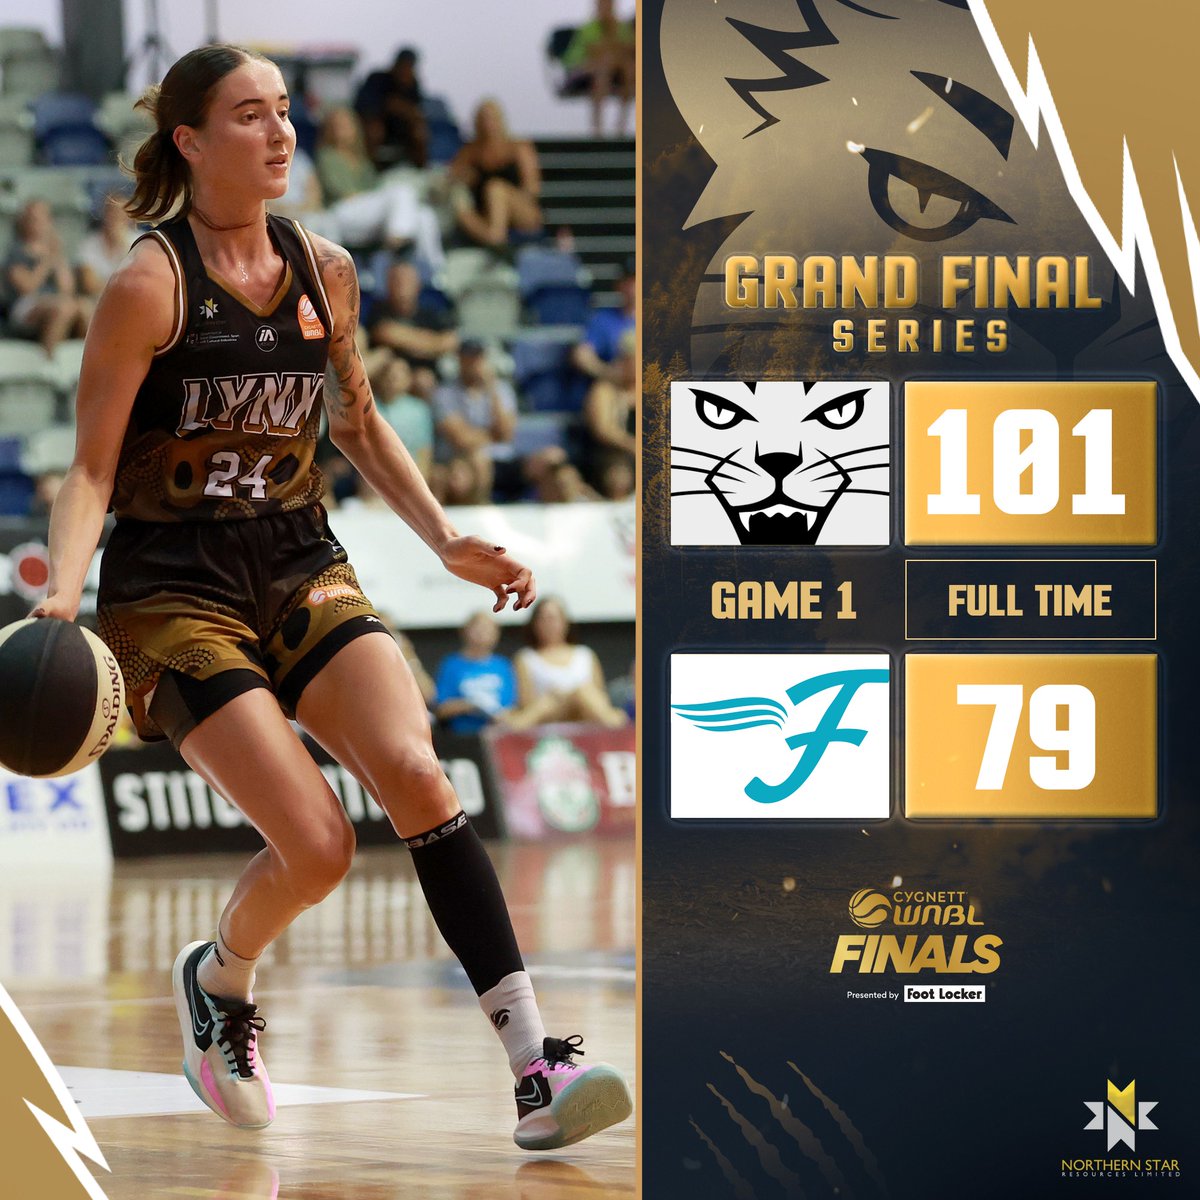 Dominant. 

Back at home for game 2. Locked in. 😤

📊 Leading Stats
Amy Atwell - 22pts, 4reb, 9 3pts
Anneli Maley - 15pts, 8reb, 6ast
Aari McDonald - 15pts, 10ast, 5reb

#wnbl24 | #perthlynx | #lynxfinals24 I #wearewnbl |#womeninsport | #womensbasketball I #basketballwa